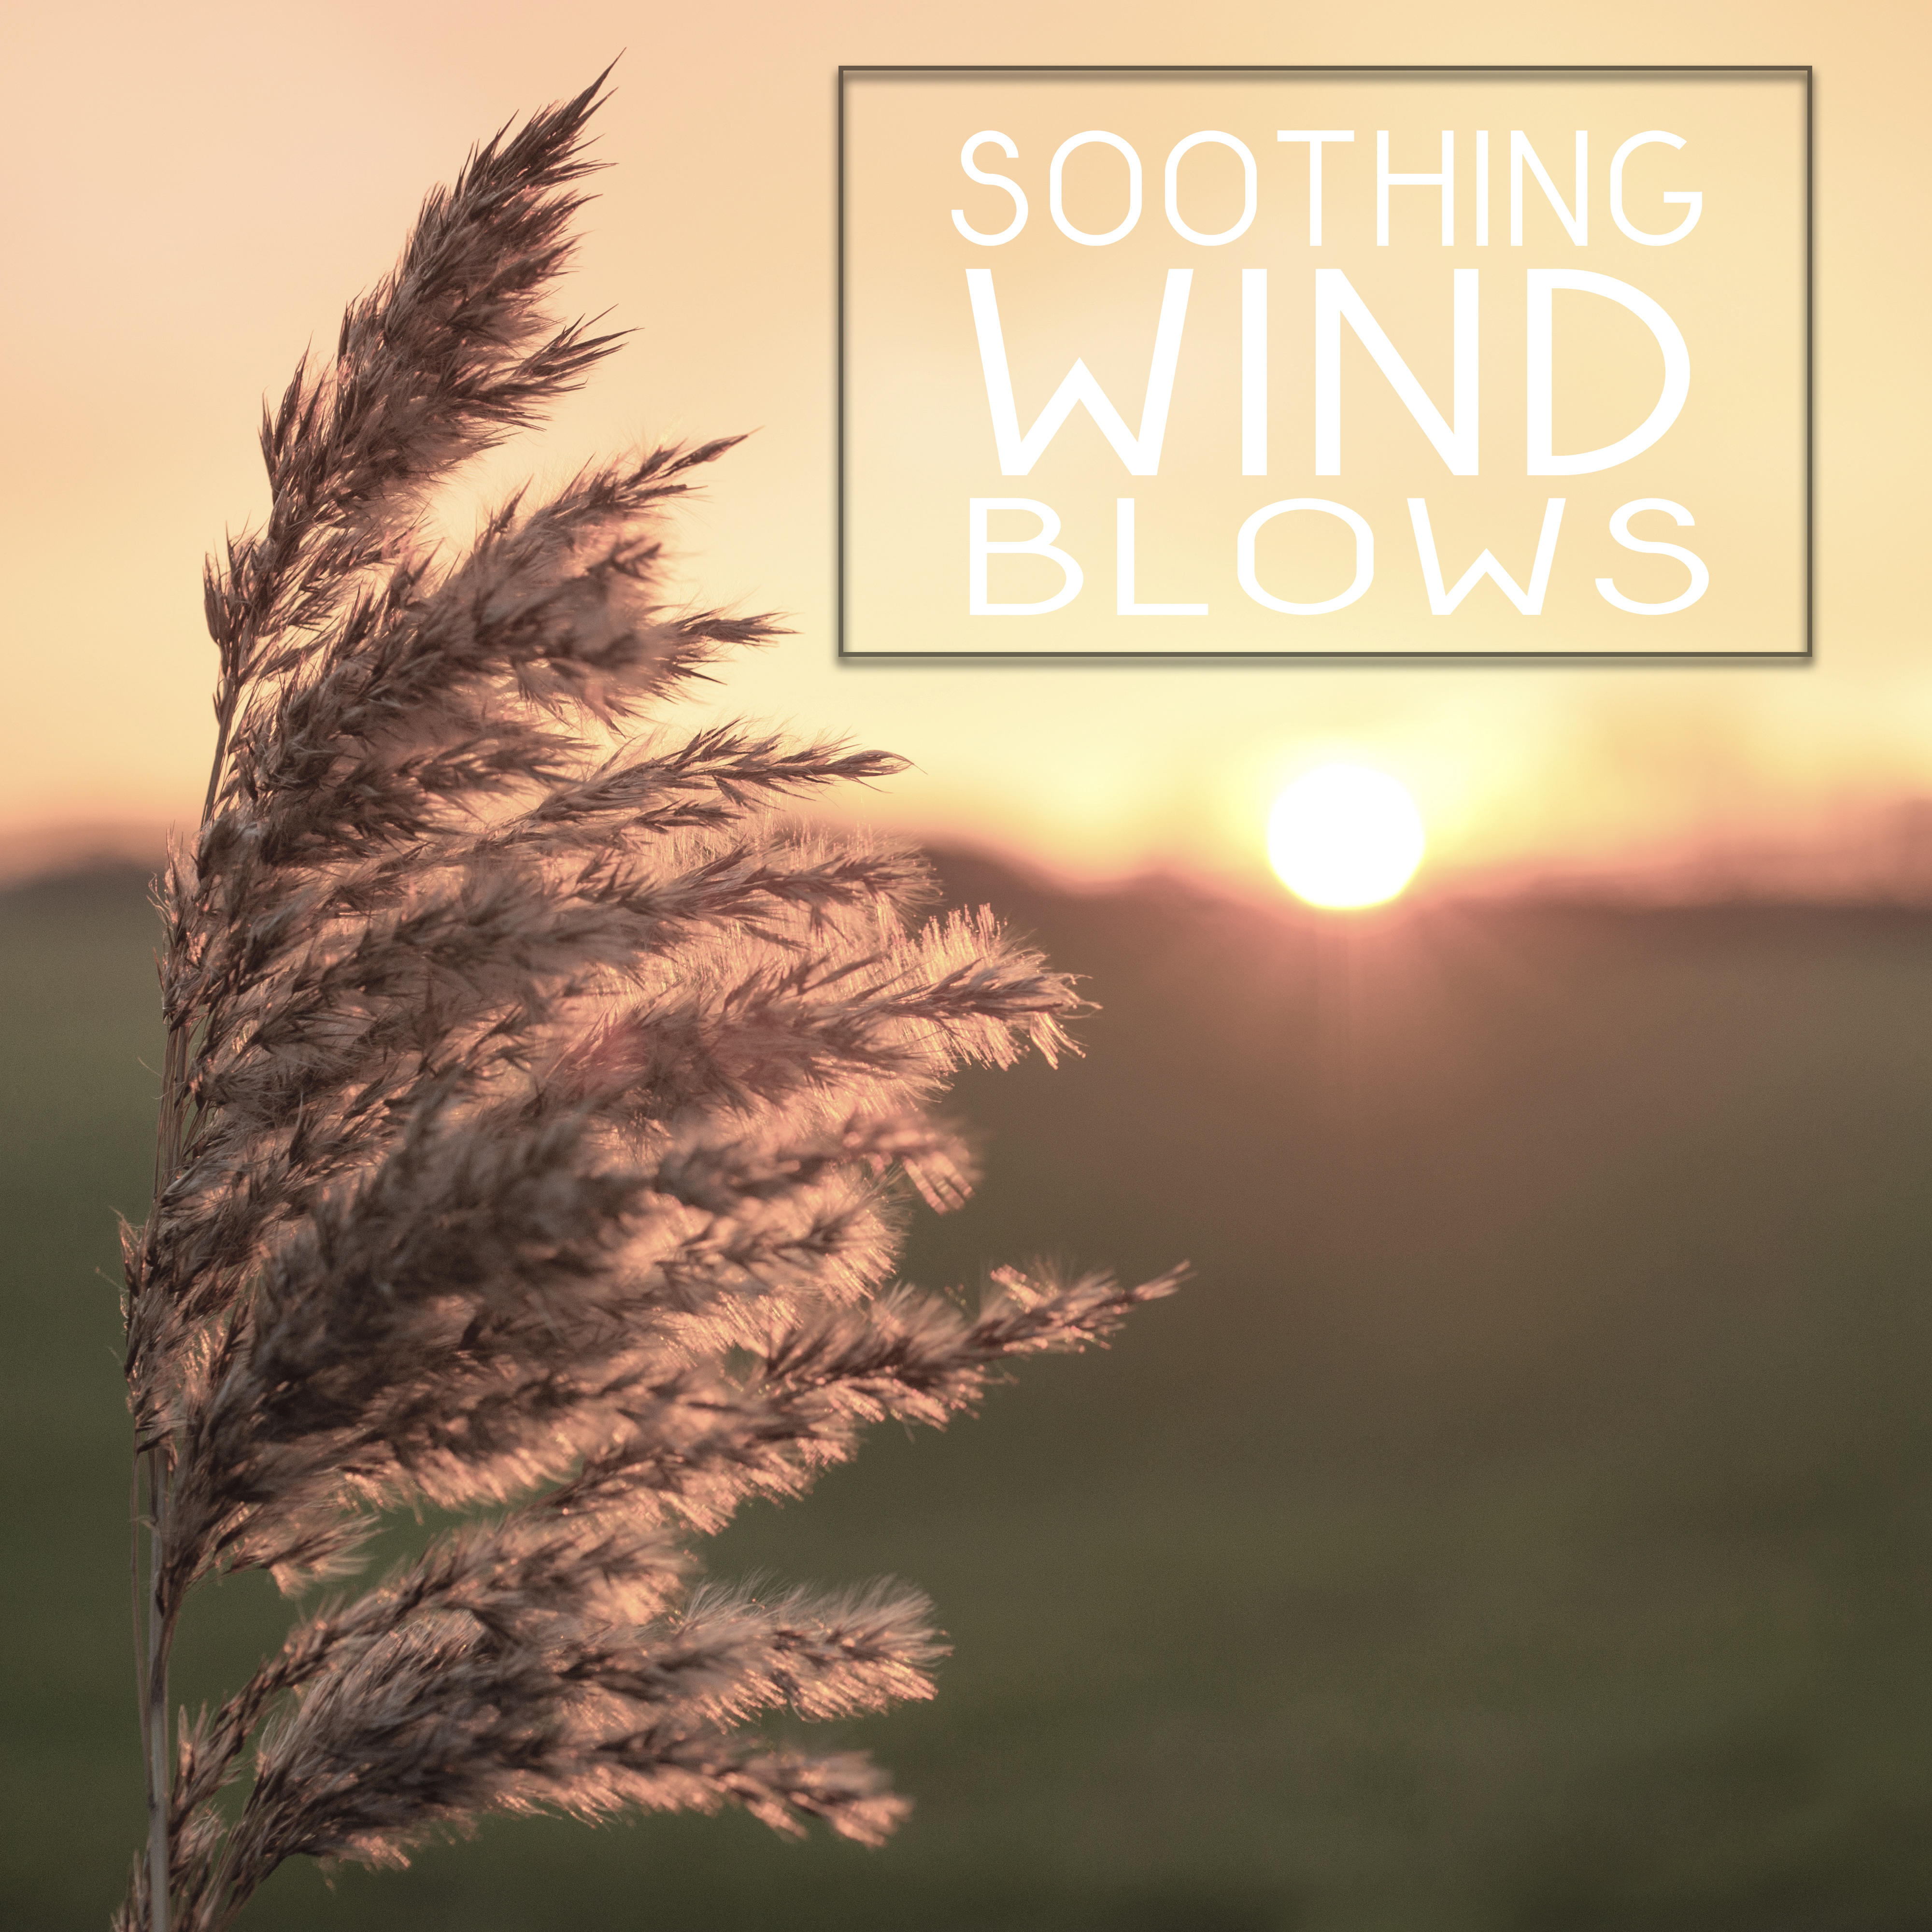 Soothing Wind Blows – Beautiful Nature Sounds, Rest & Relax, New Age Music, Sounds to Calm Mind